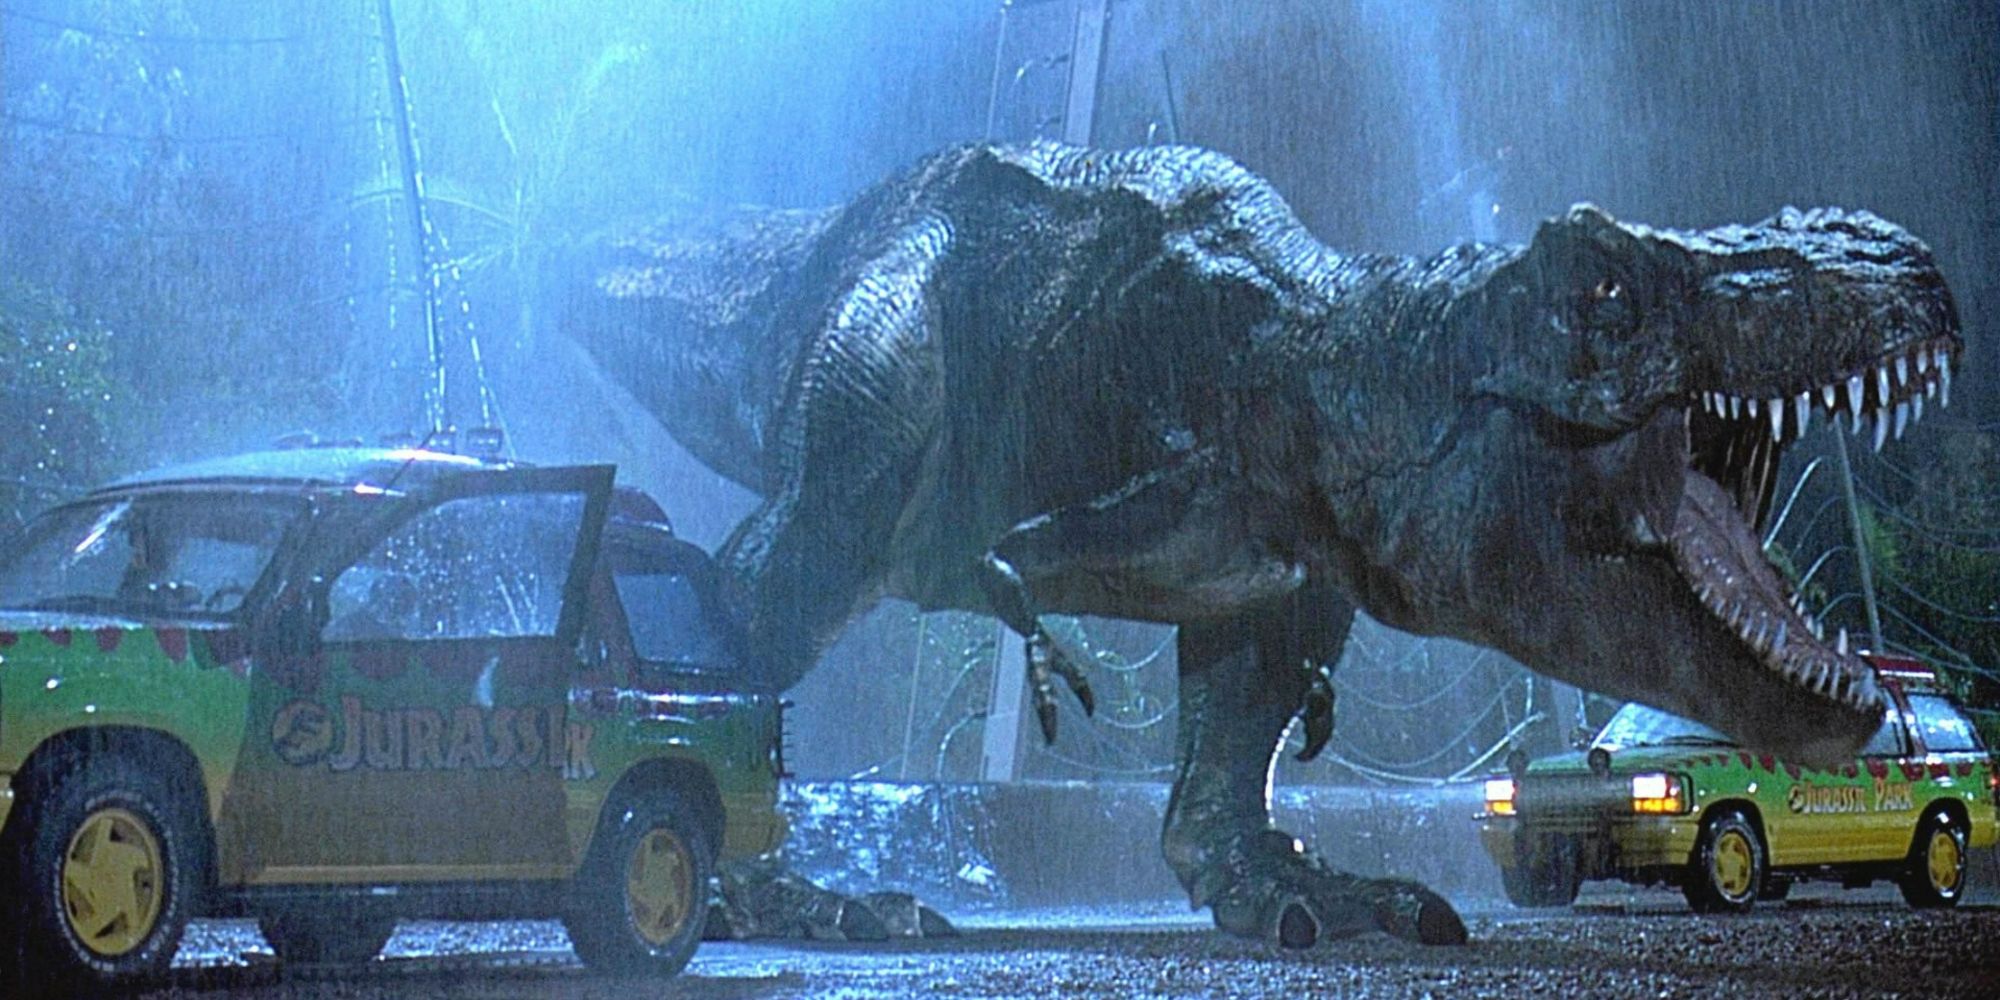 The T-rex rampages in Spielberg's Jurassic Park